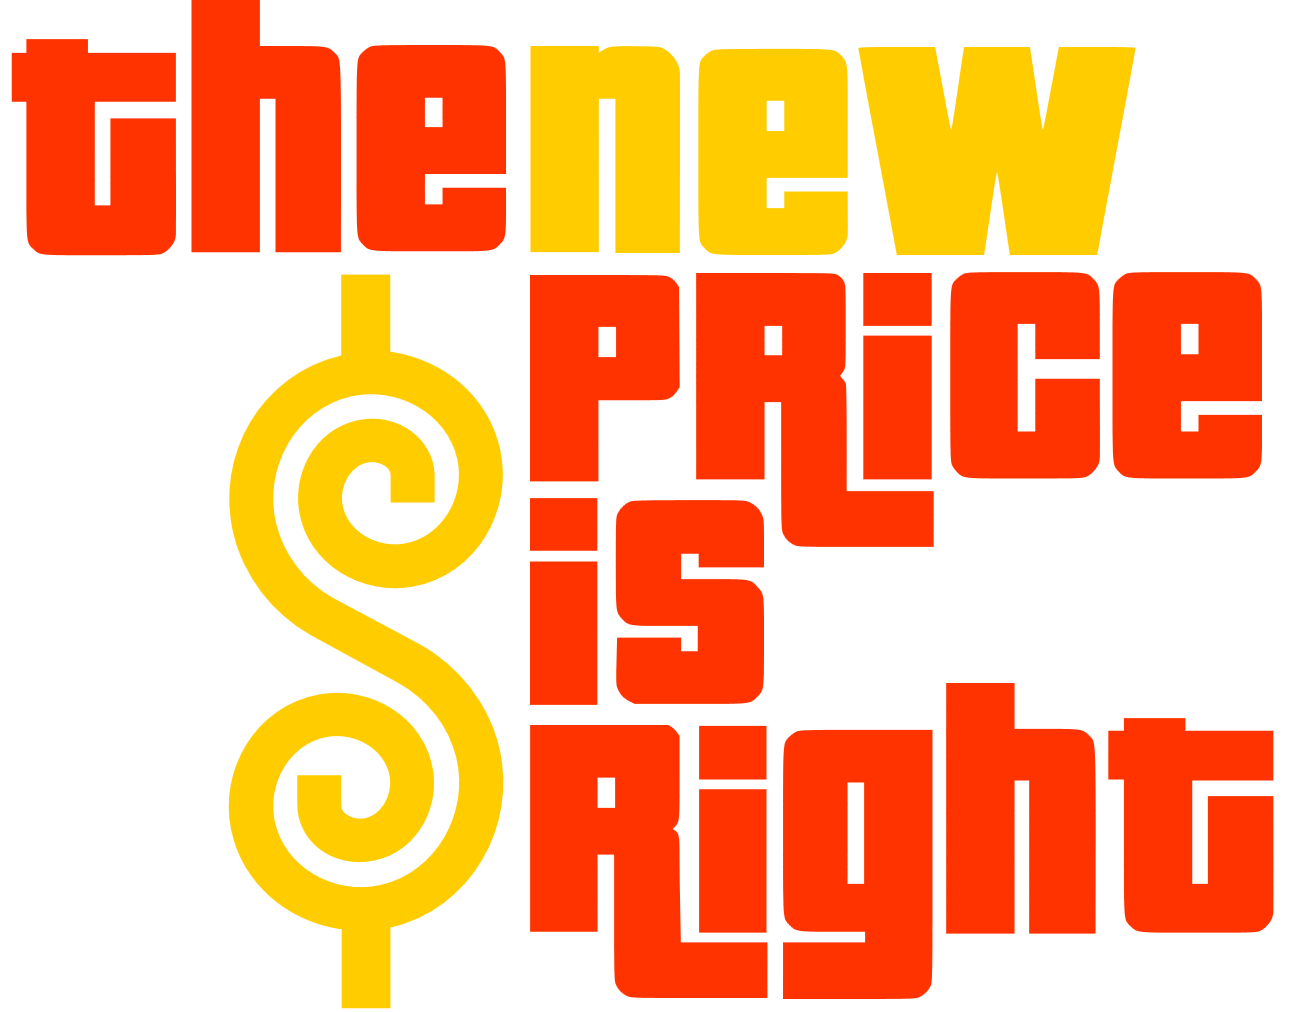 Right Logo - The Price is Right